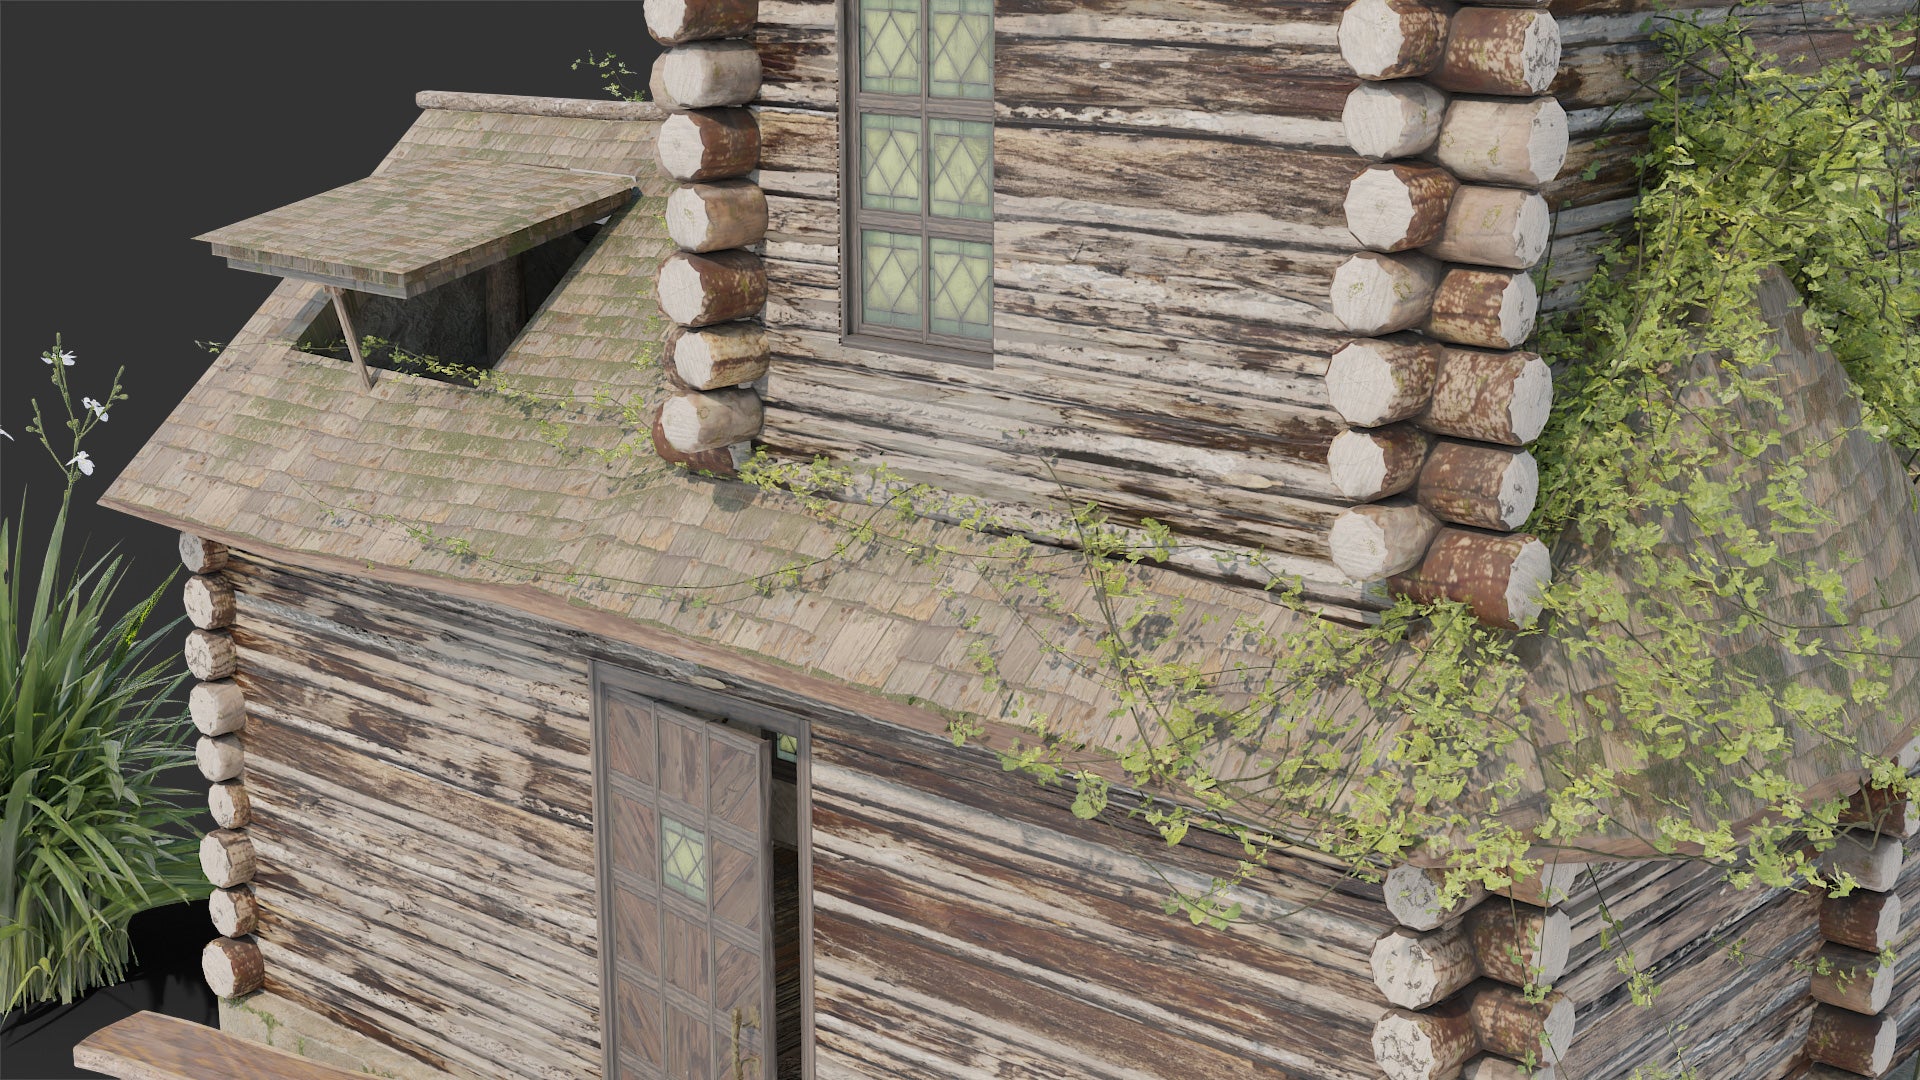 Medieval house wood cabin 3d model Blender OBJ with PBR textures and low-poly